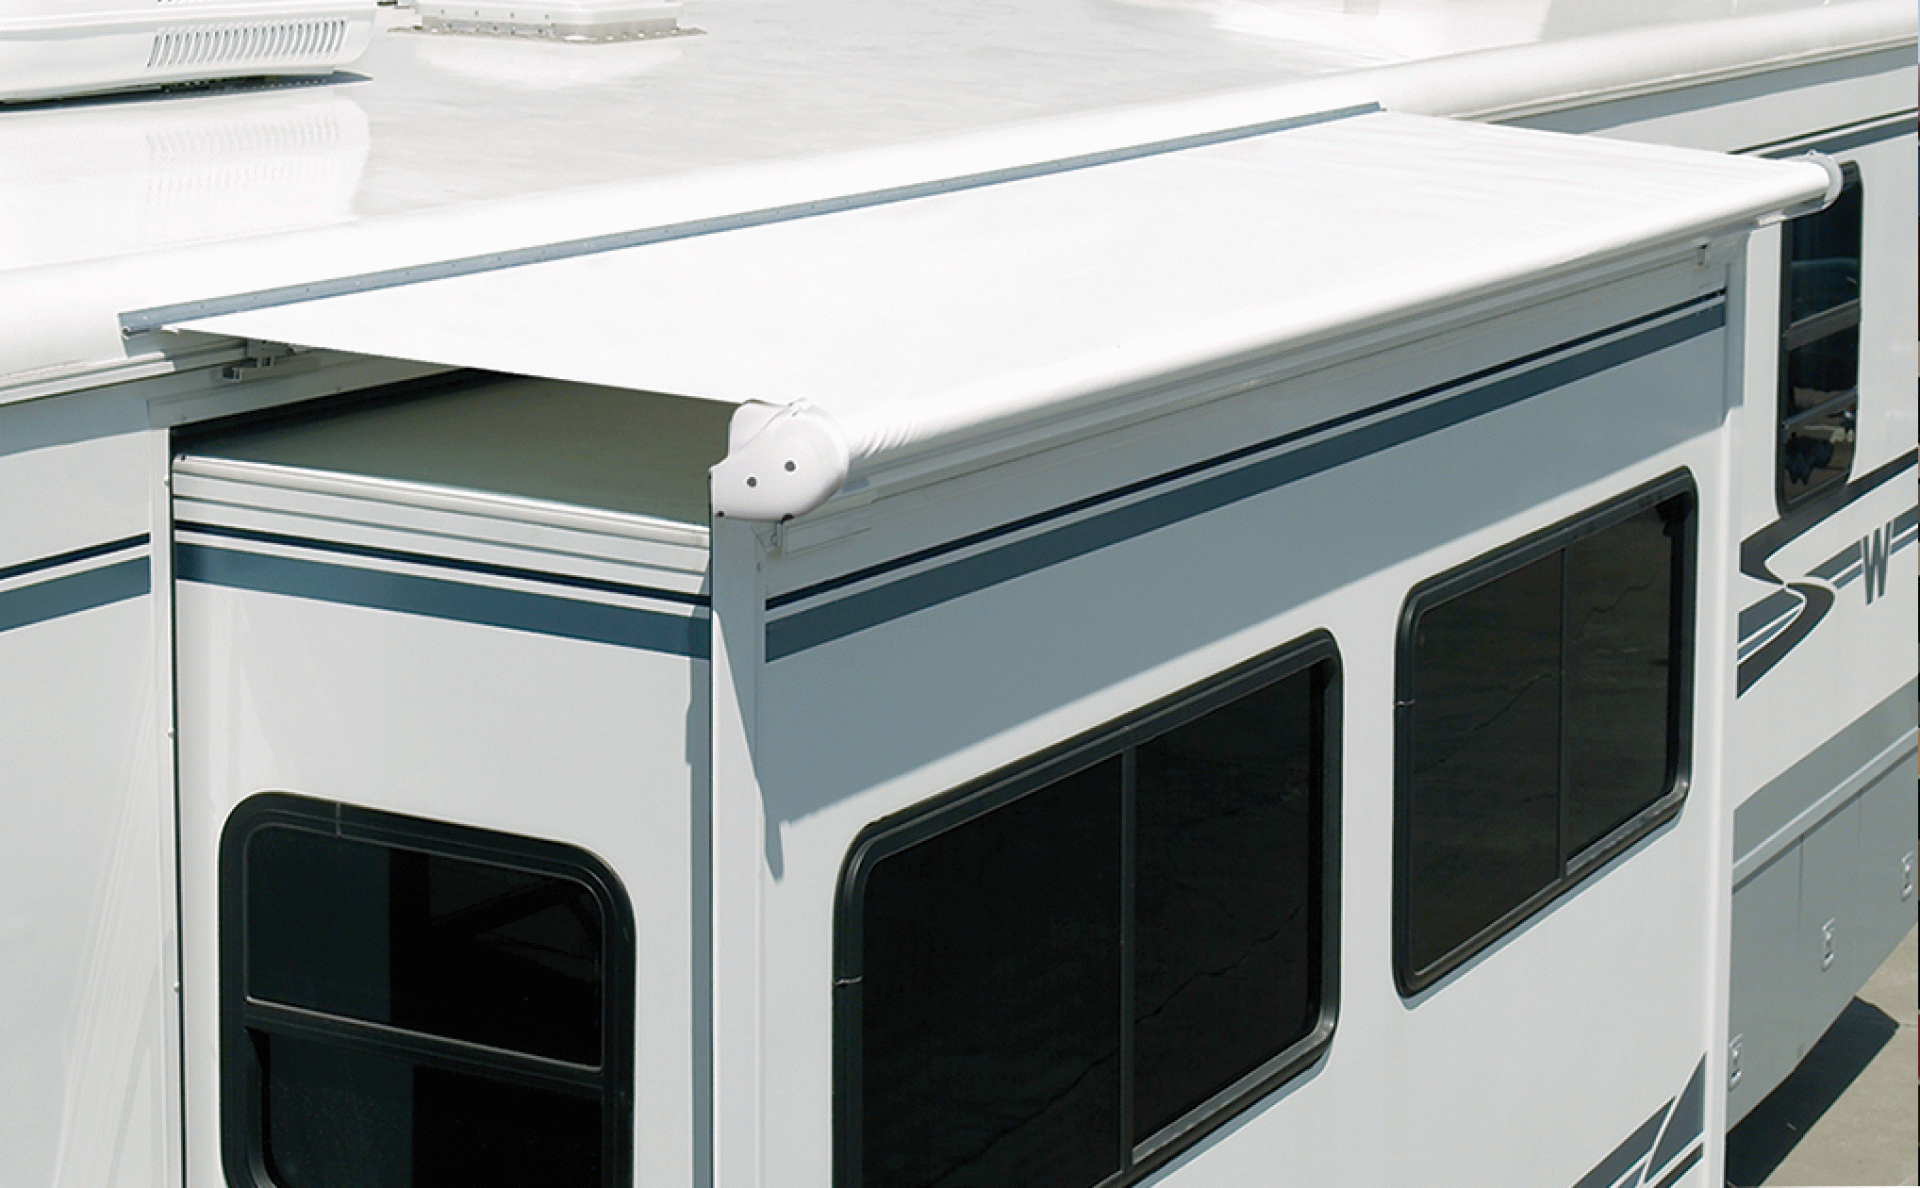 CAREFREE OF COLORADO | UQ0970025 | SIDEOUT KOVER III AWNING 94" - 97" ROOF RANGE WHITE VINYL FABRIC & DEFLECTOR